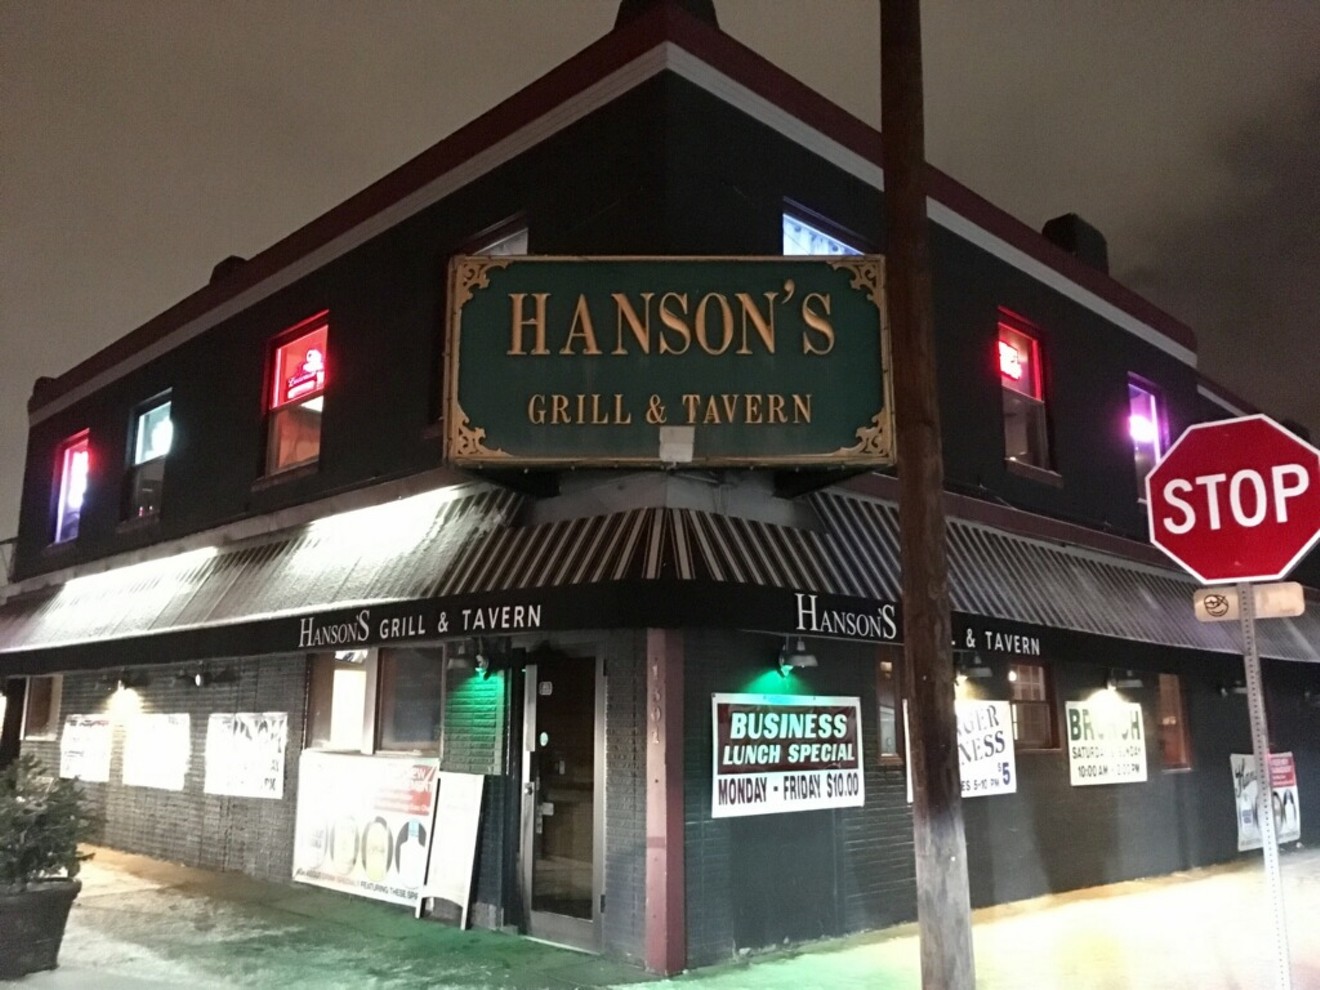 Hanson's, at the corner of Louisiana and Pearl, welcomes the whole neighborhood in for a drink, even if it's snowy.